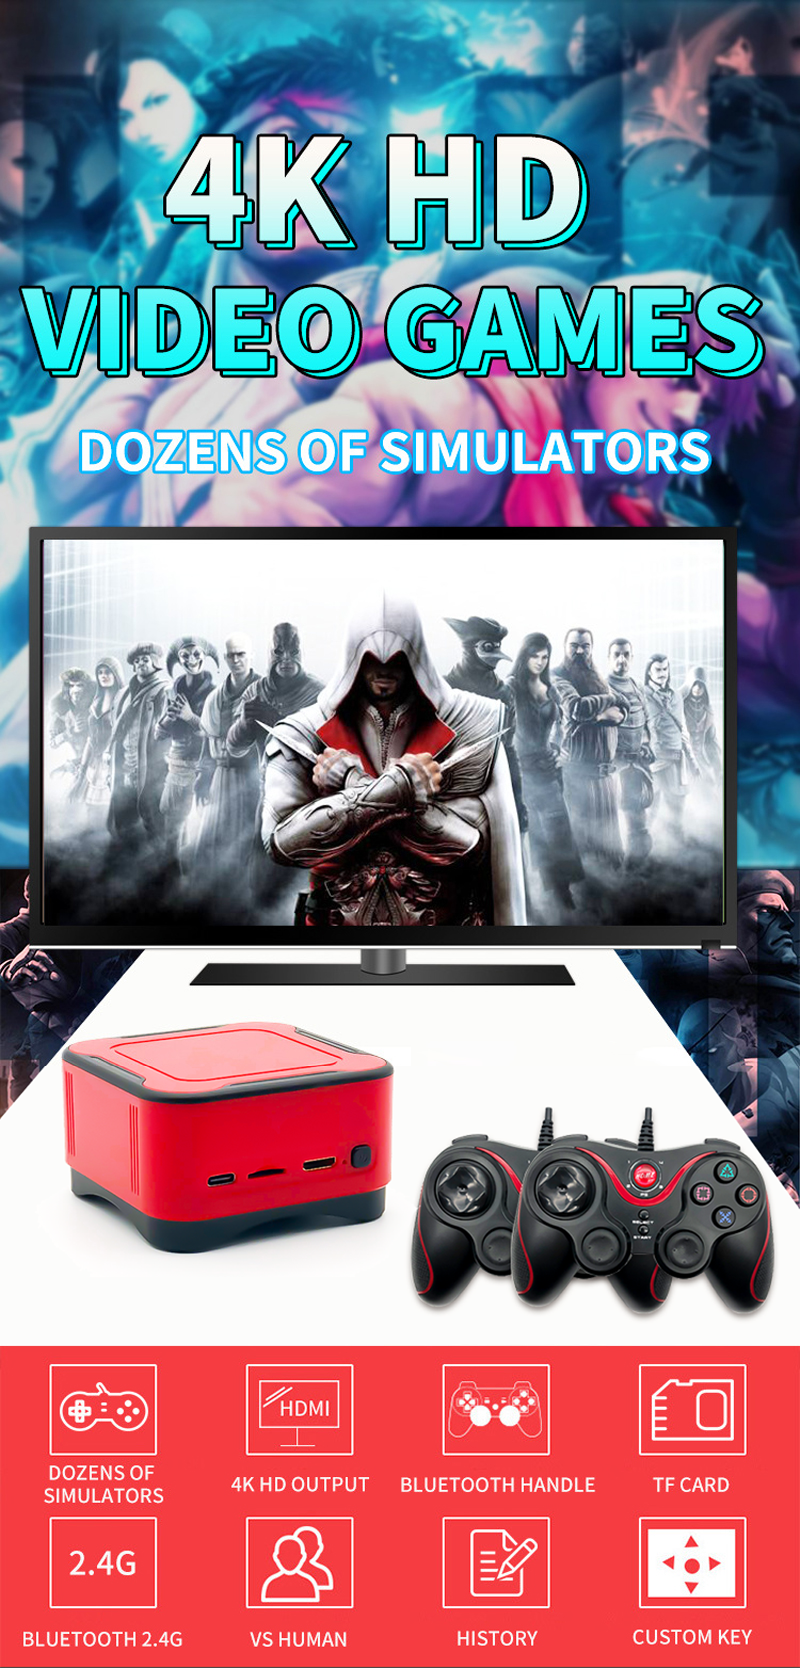 ANBERNIC-64GB-4K-HD-bluetooth-24G-Mini-Magic-Club-Video-Game-Console-with-2-Wired-Gamepads-Support-P-1696157